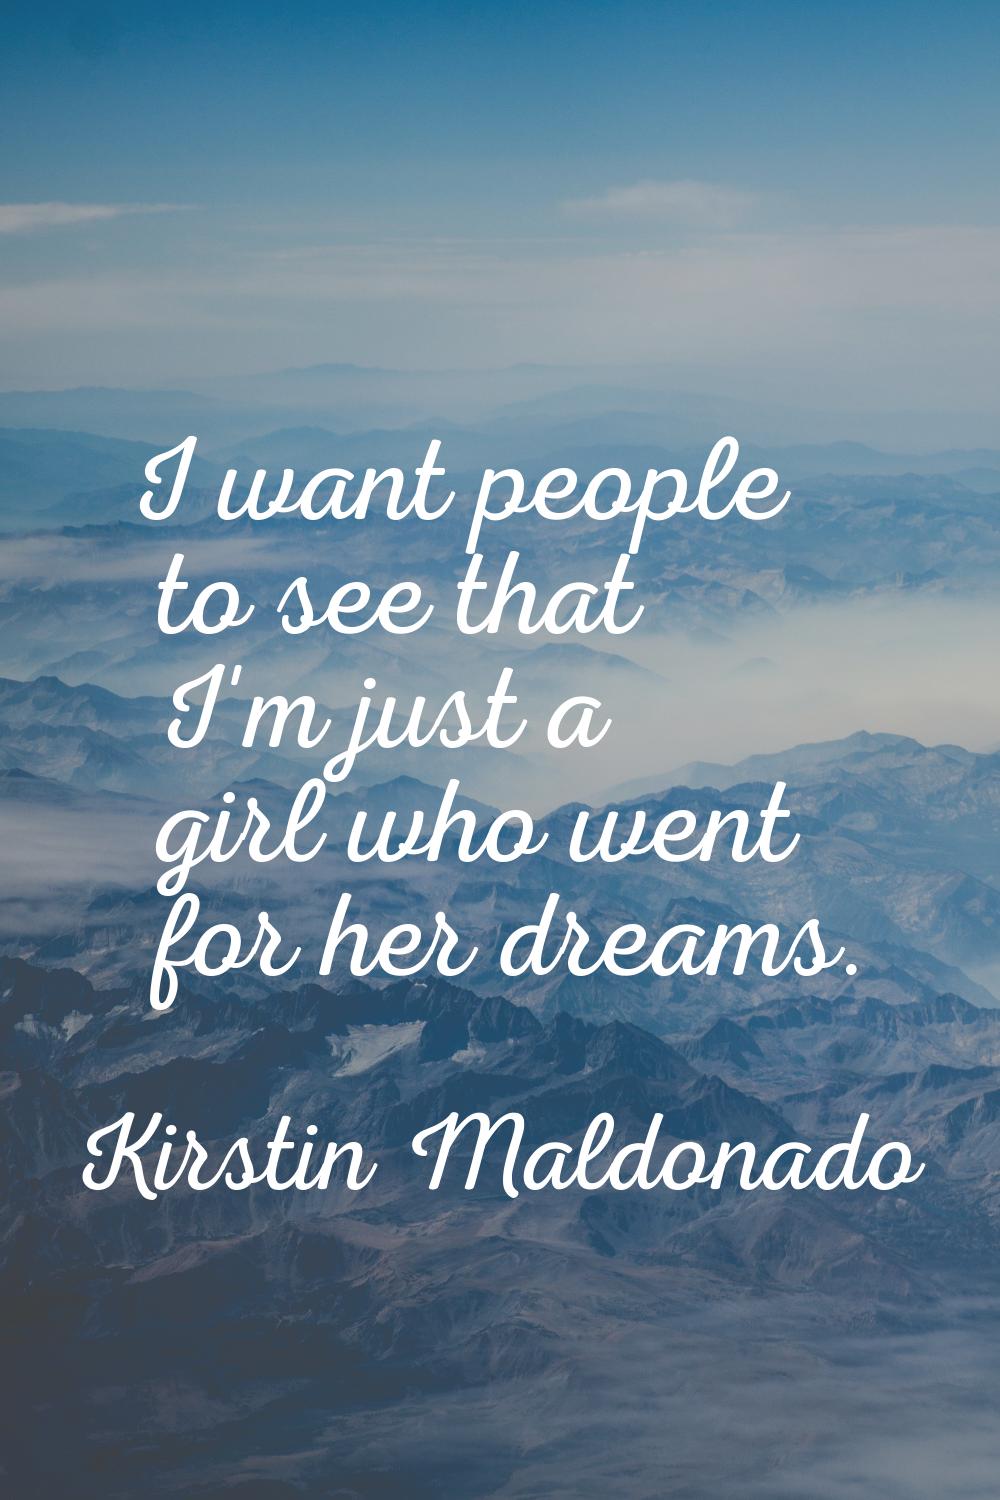 I want people to see that I'm just a girl who went for her dreams.